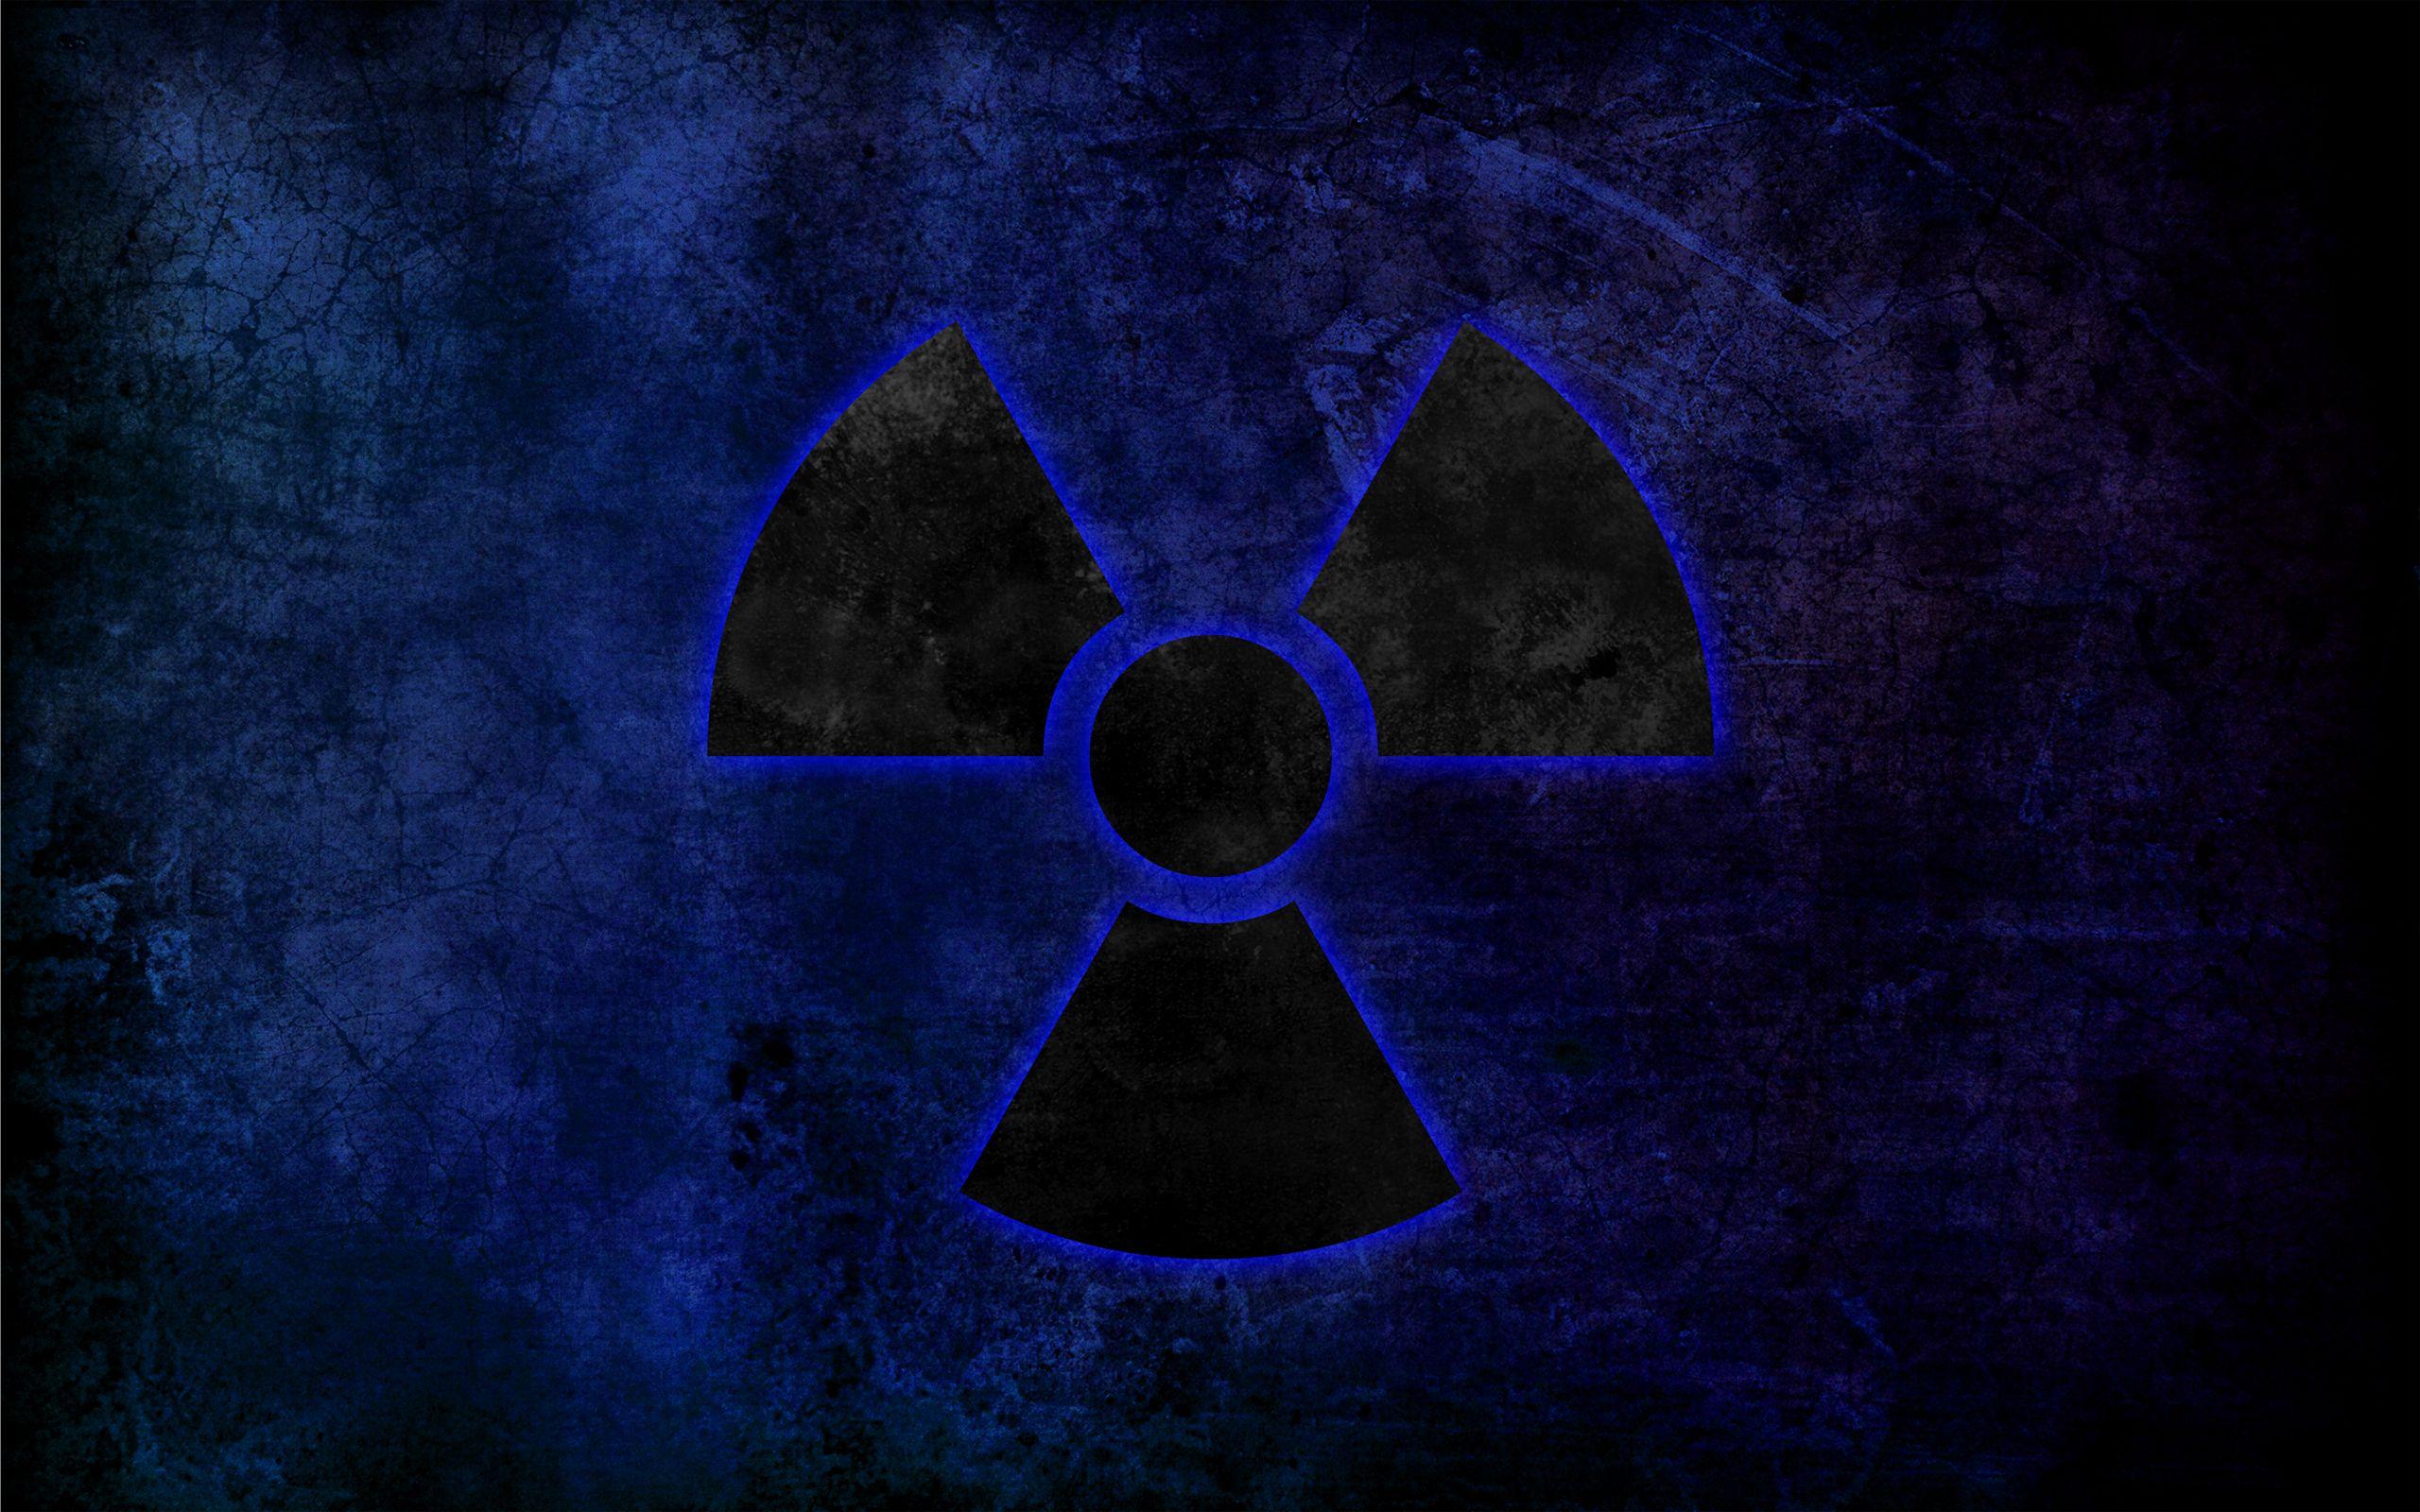 Radioactive Sign wallpaper. Current and next projects 2013